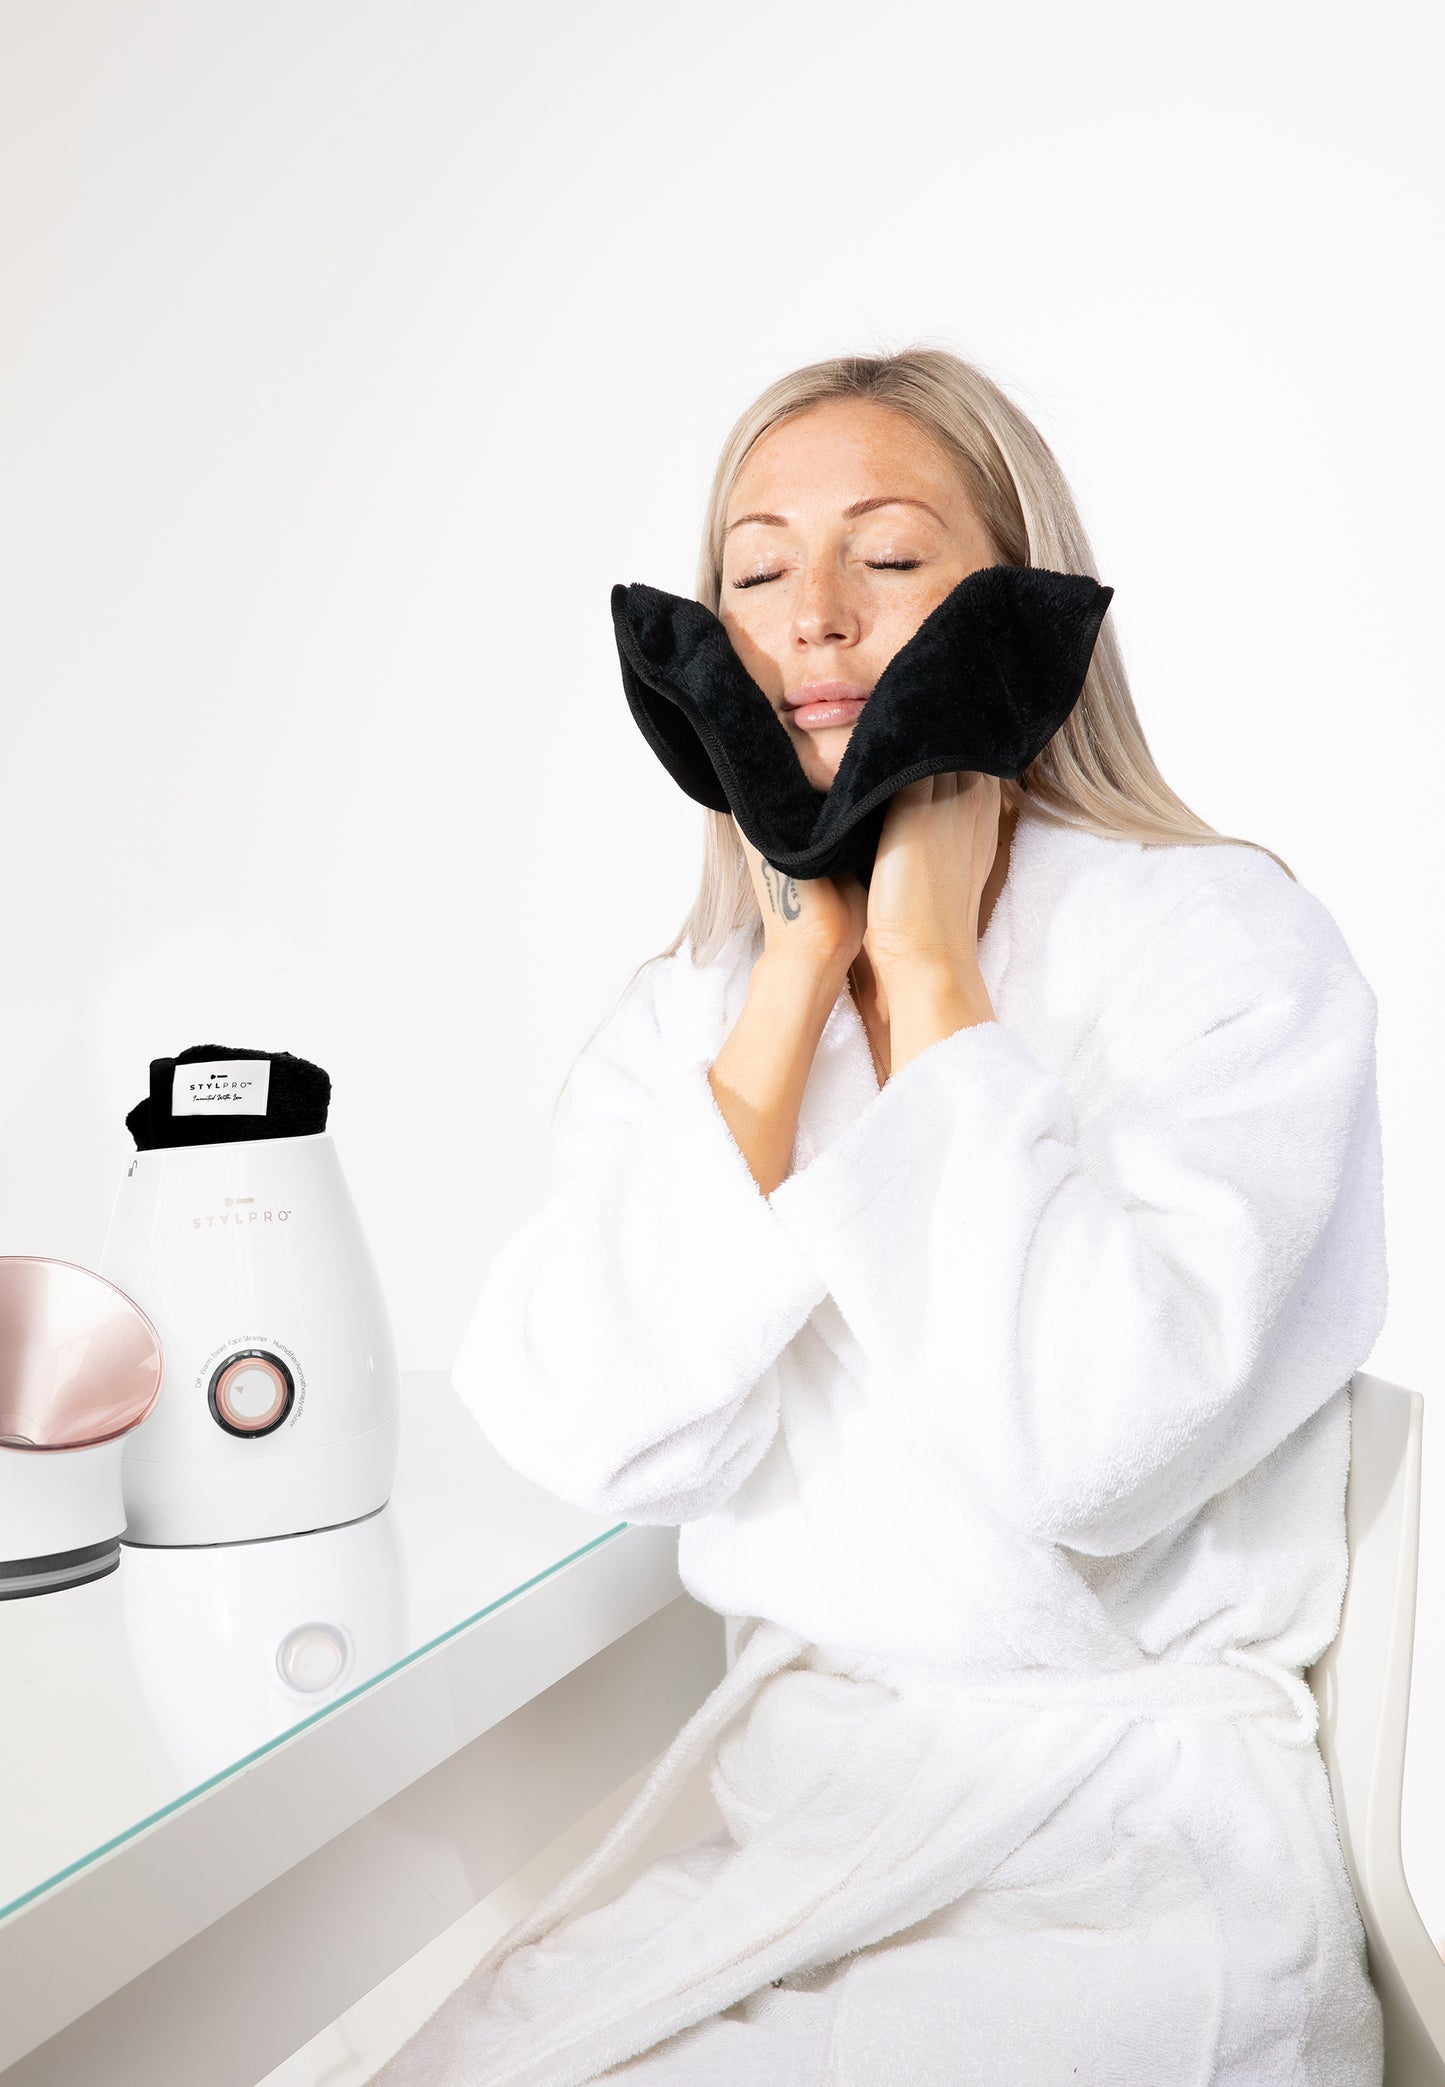 4-in-1 Ionic Facial Steamer